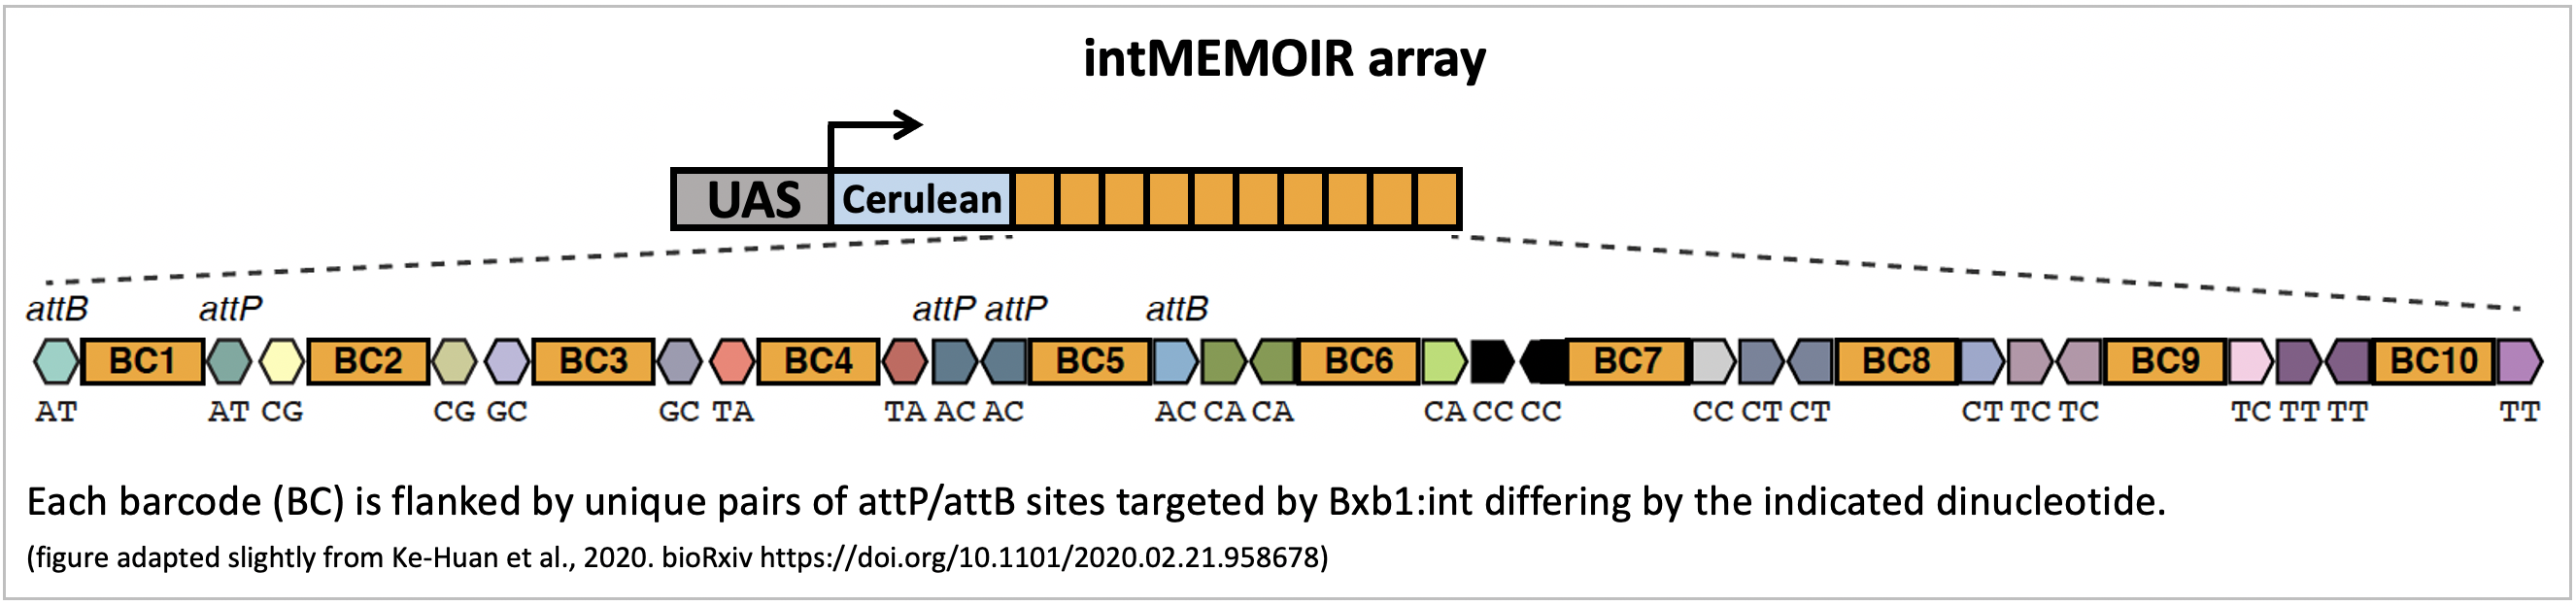 schematic of the 10 bxb1 target site-flanked barcodes that make up the intmemoir system